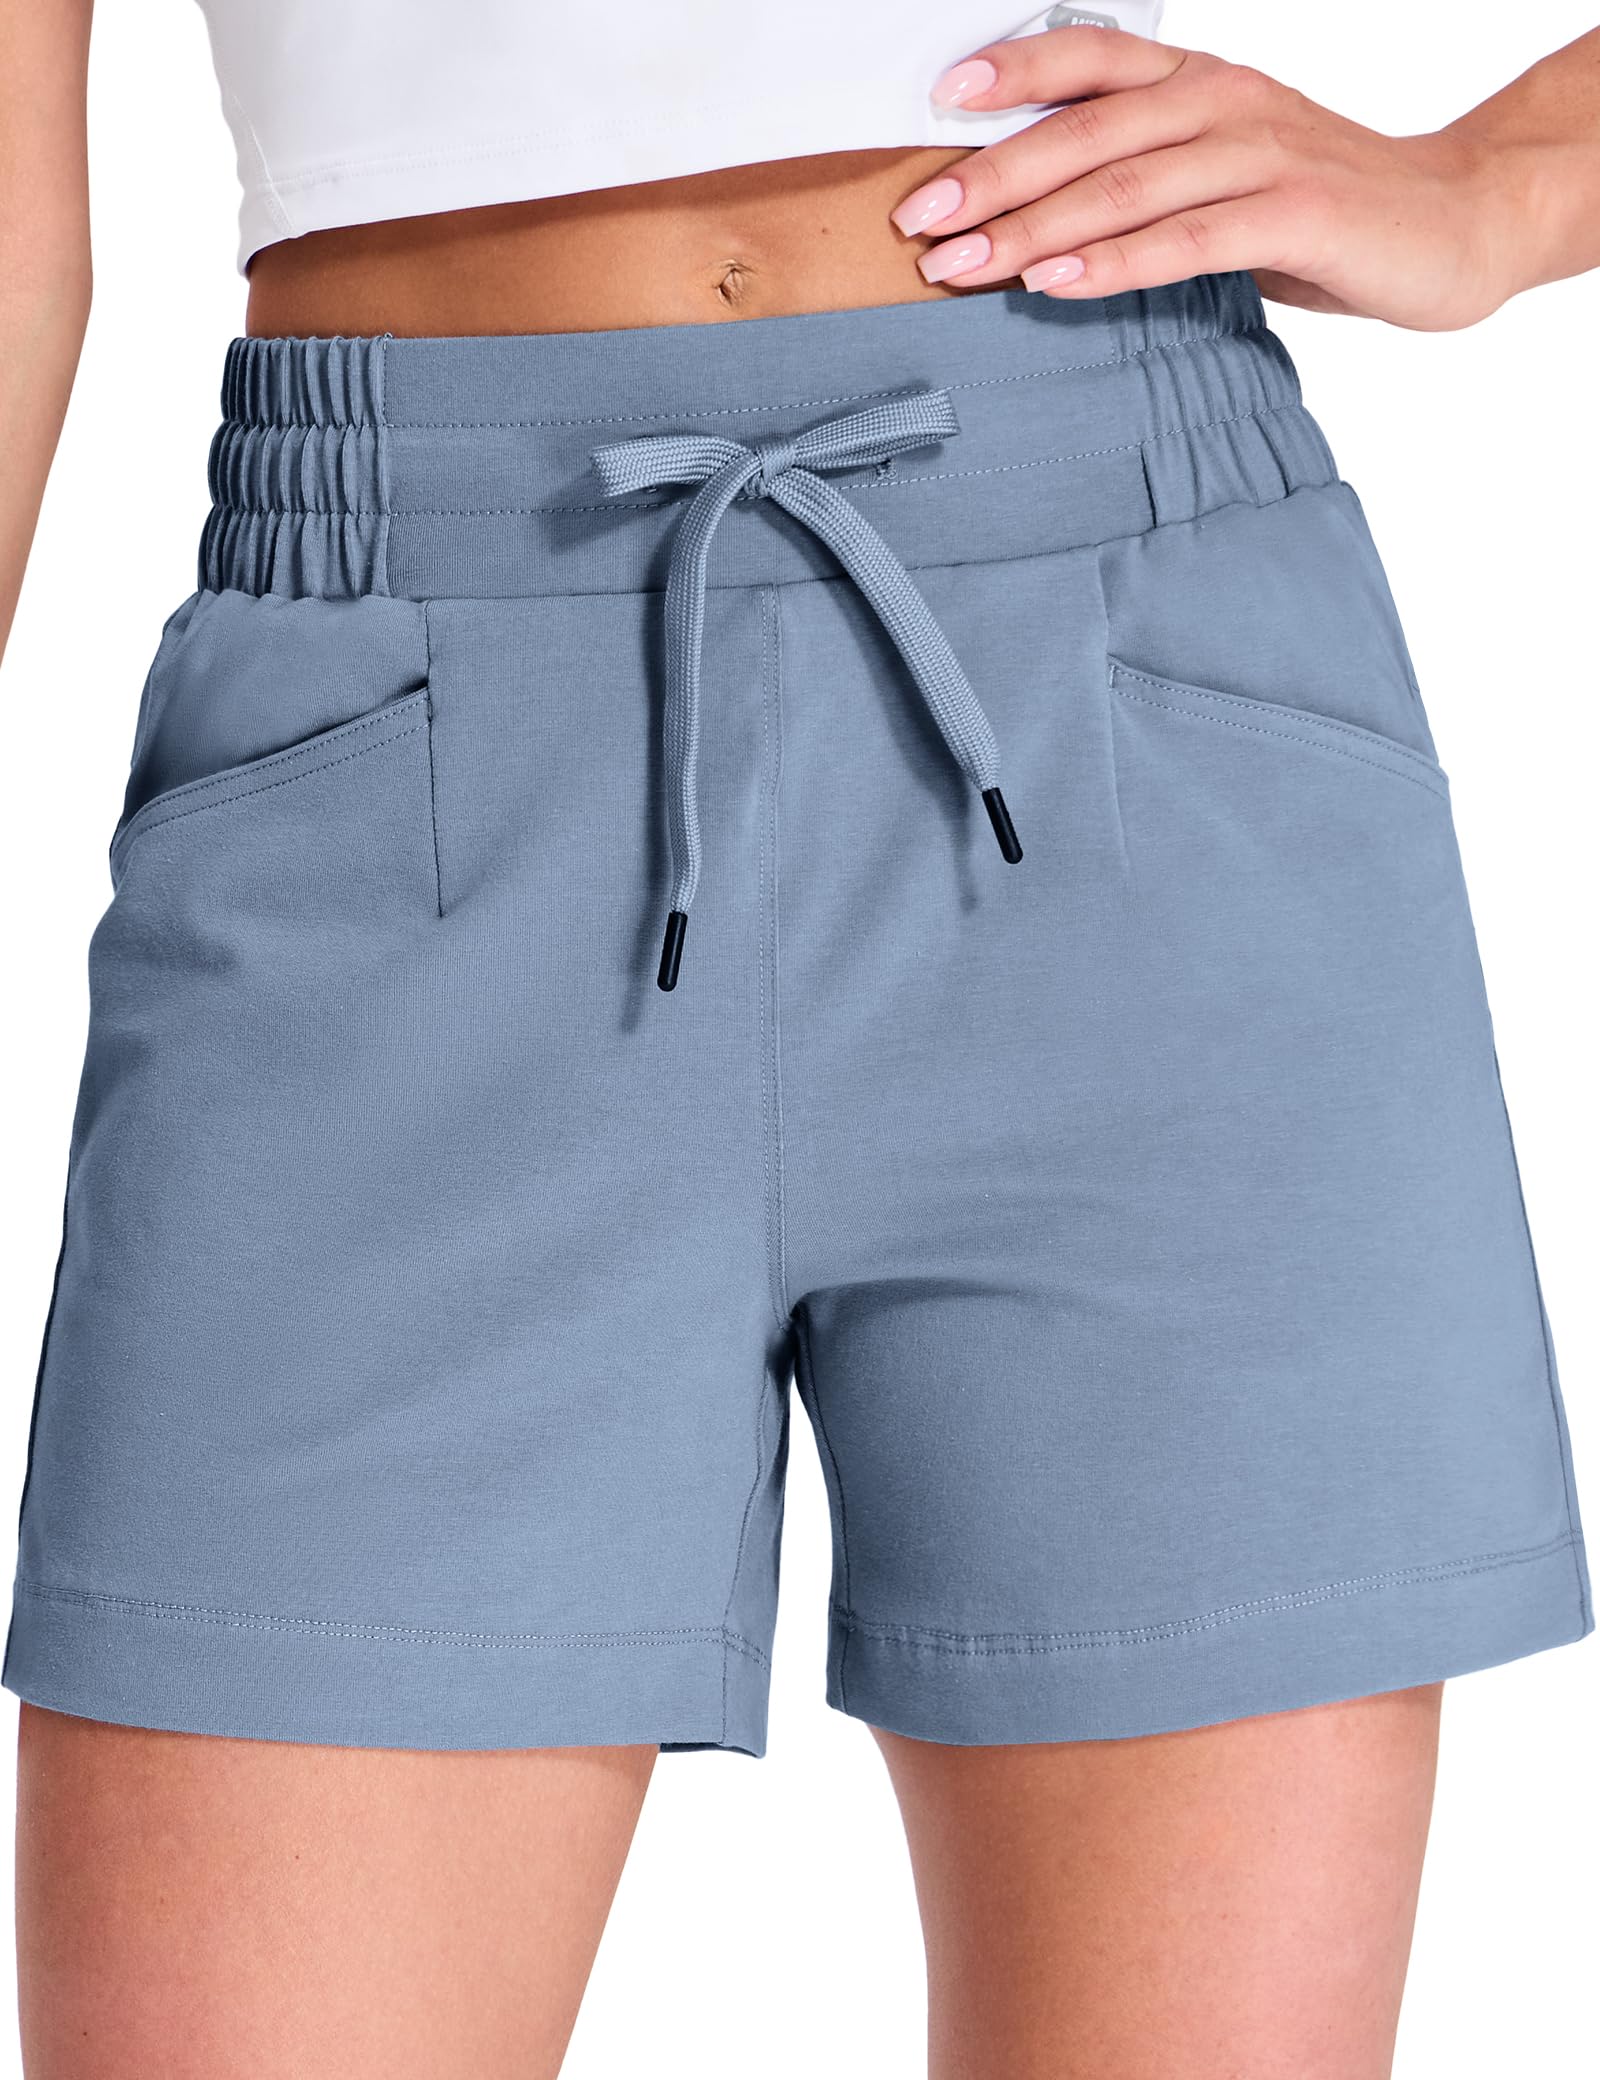 Women's Athletic Running Cotton Shorts 4" High Waisted